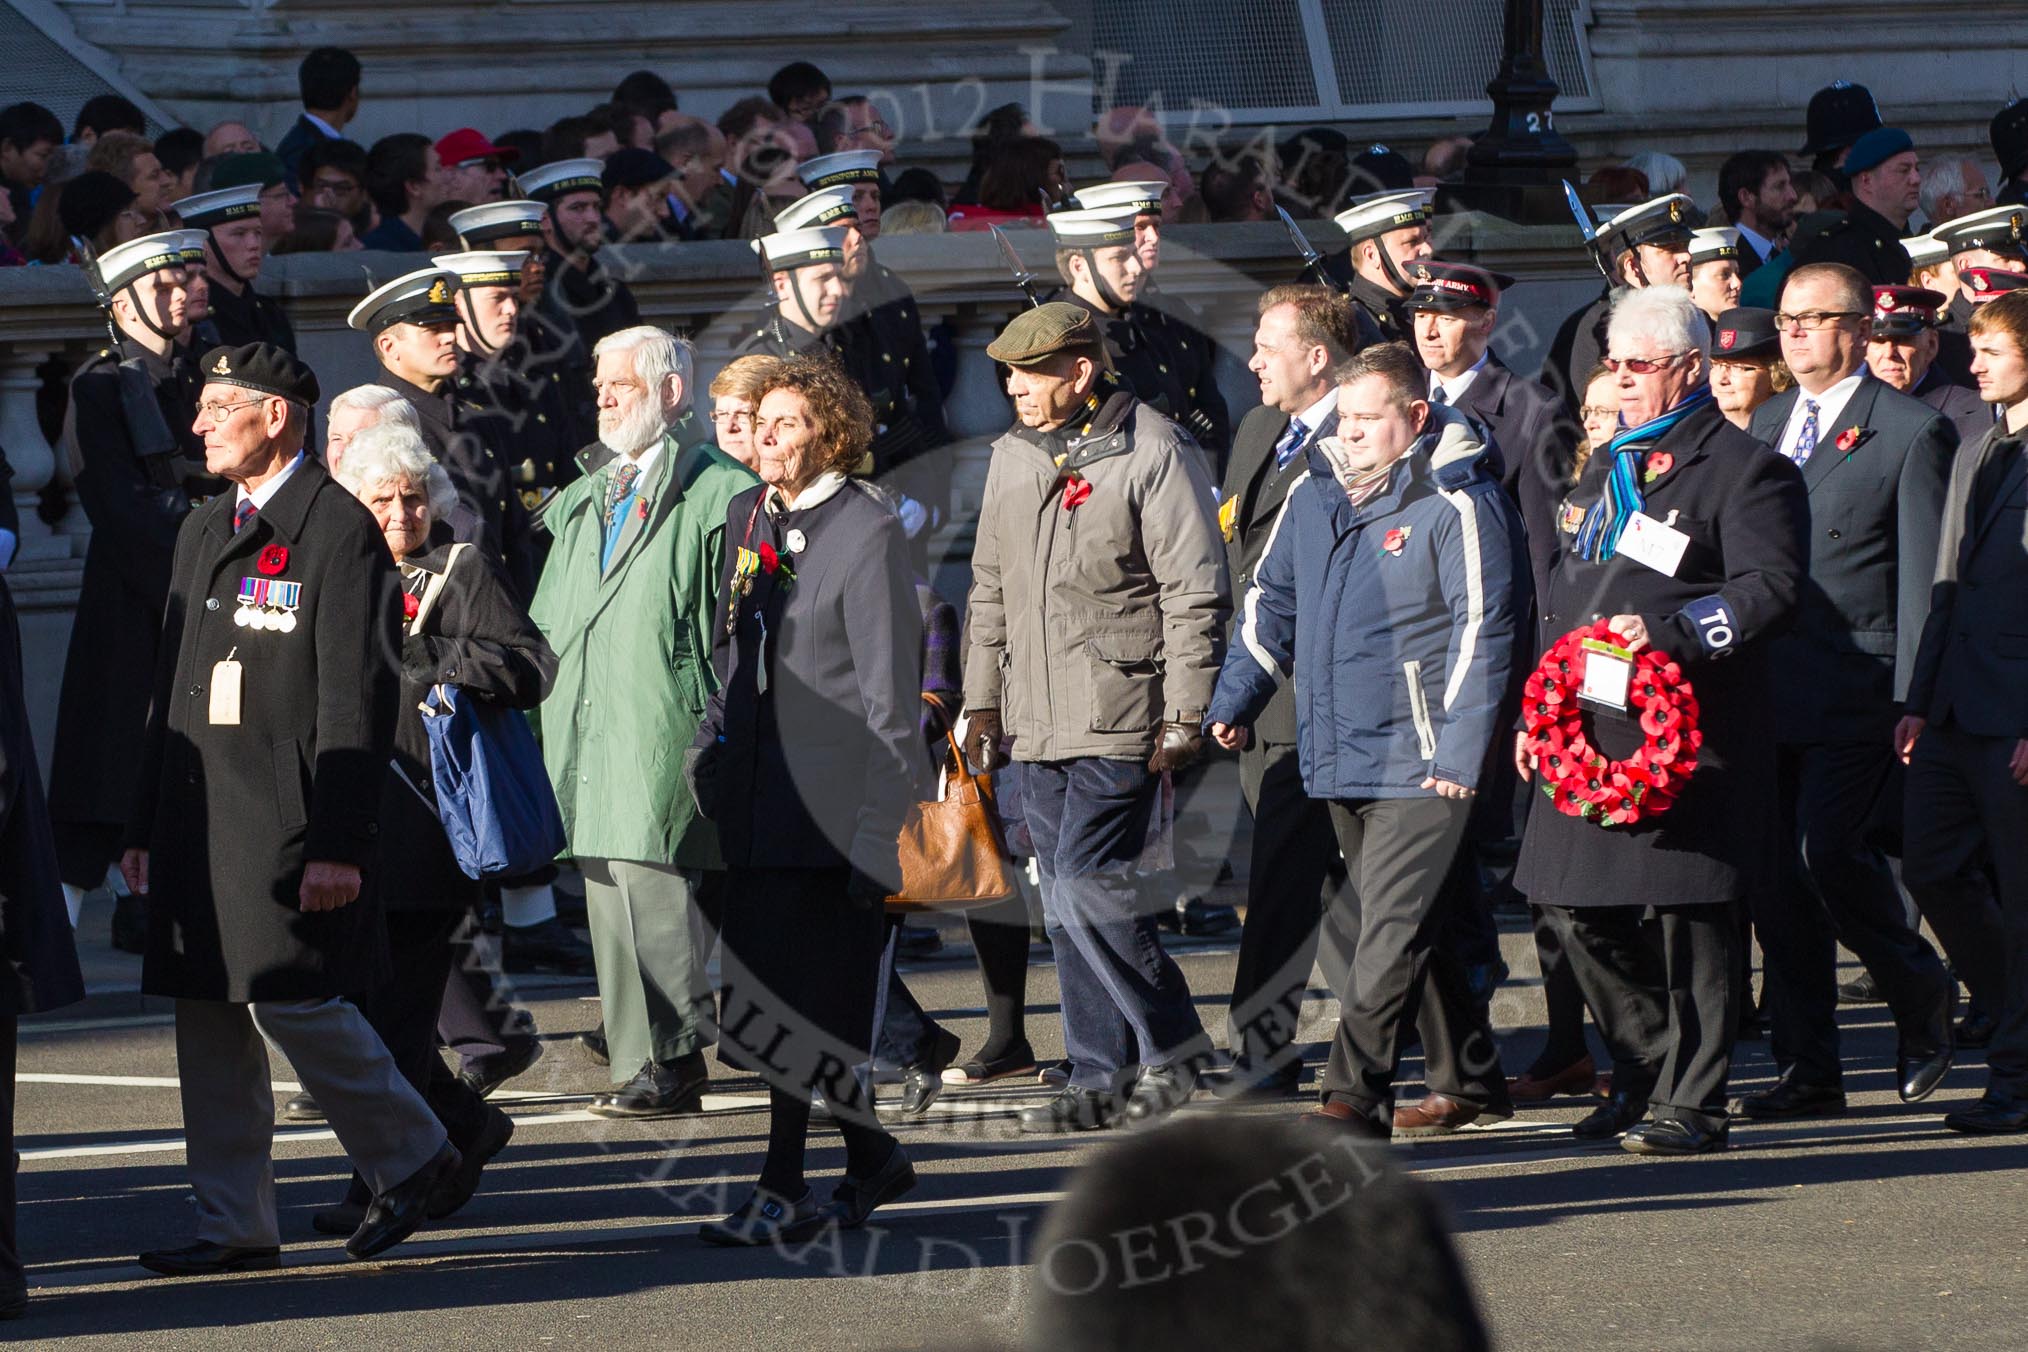 Remembrance Sunday 2012 Cenotaph March Past: Group M6 - Evacuees Reunion Association and M7 - TOC H..
Whitehall, Cenotaph,
London SW1,

United Kingdom,
on 11 November 2012 at 12:10, image #1466